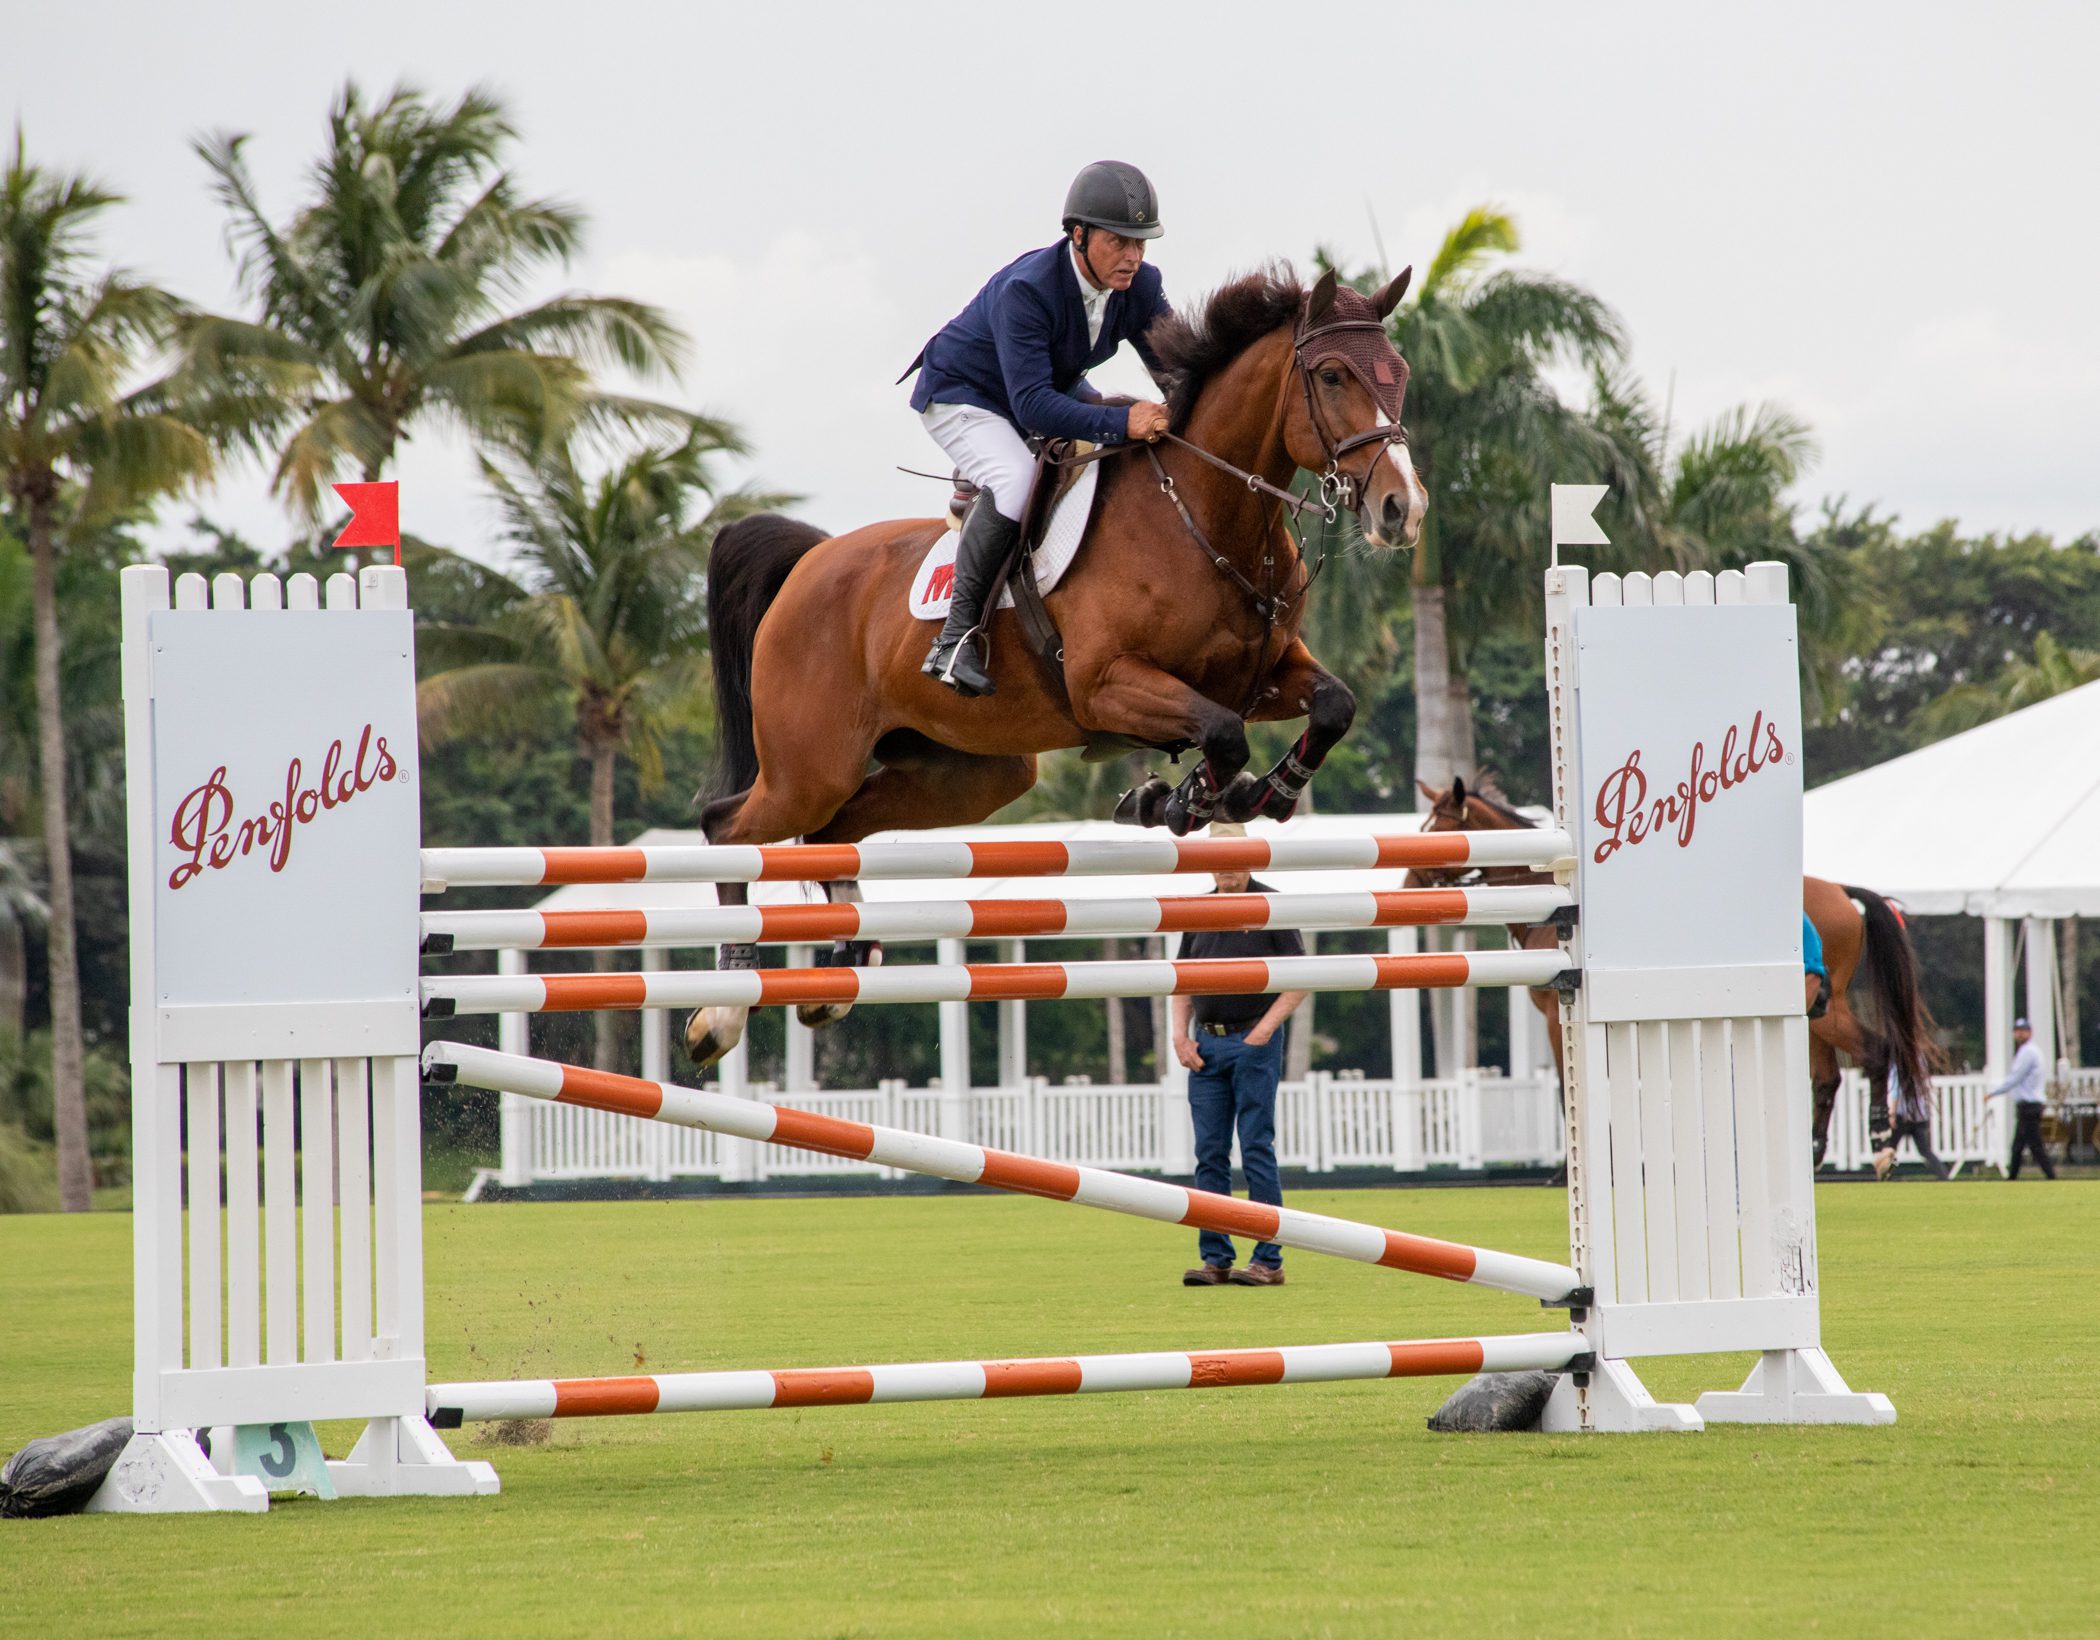 Show Jumping at the Equestrian Legends event for The Buoniconti Fund in Wellington Florida